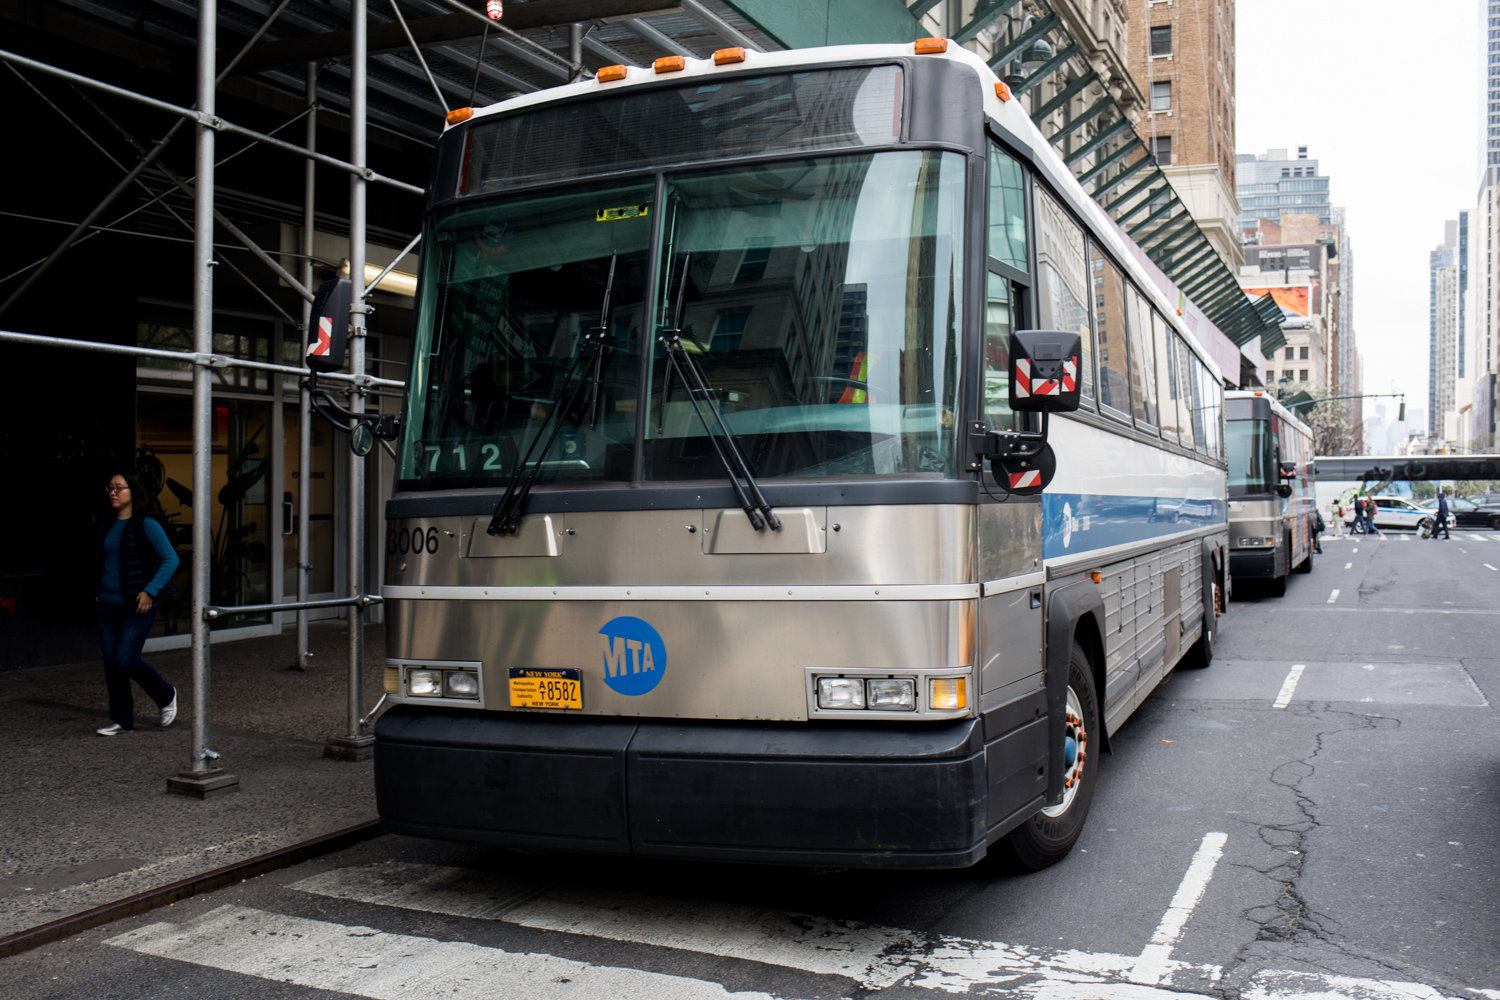 Going to the city in the plush comfort of buses like the BxM1, BxM2 and BxM18 will become impossible in the late afternoon and evening hours if the MTA gets its way in stopping Manhattan-bound service early.